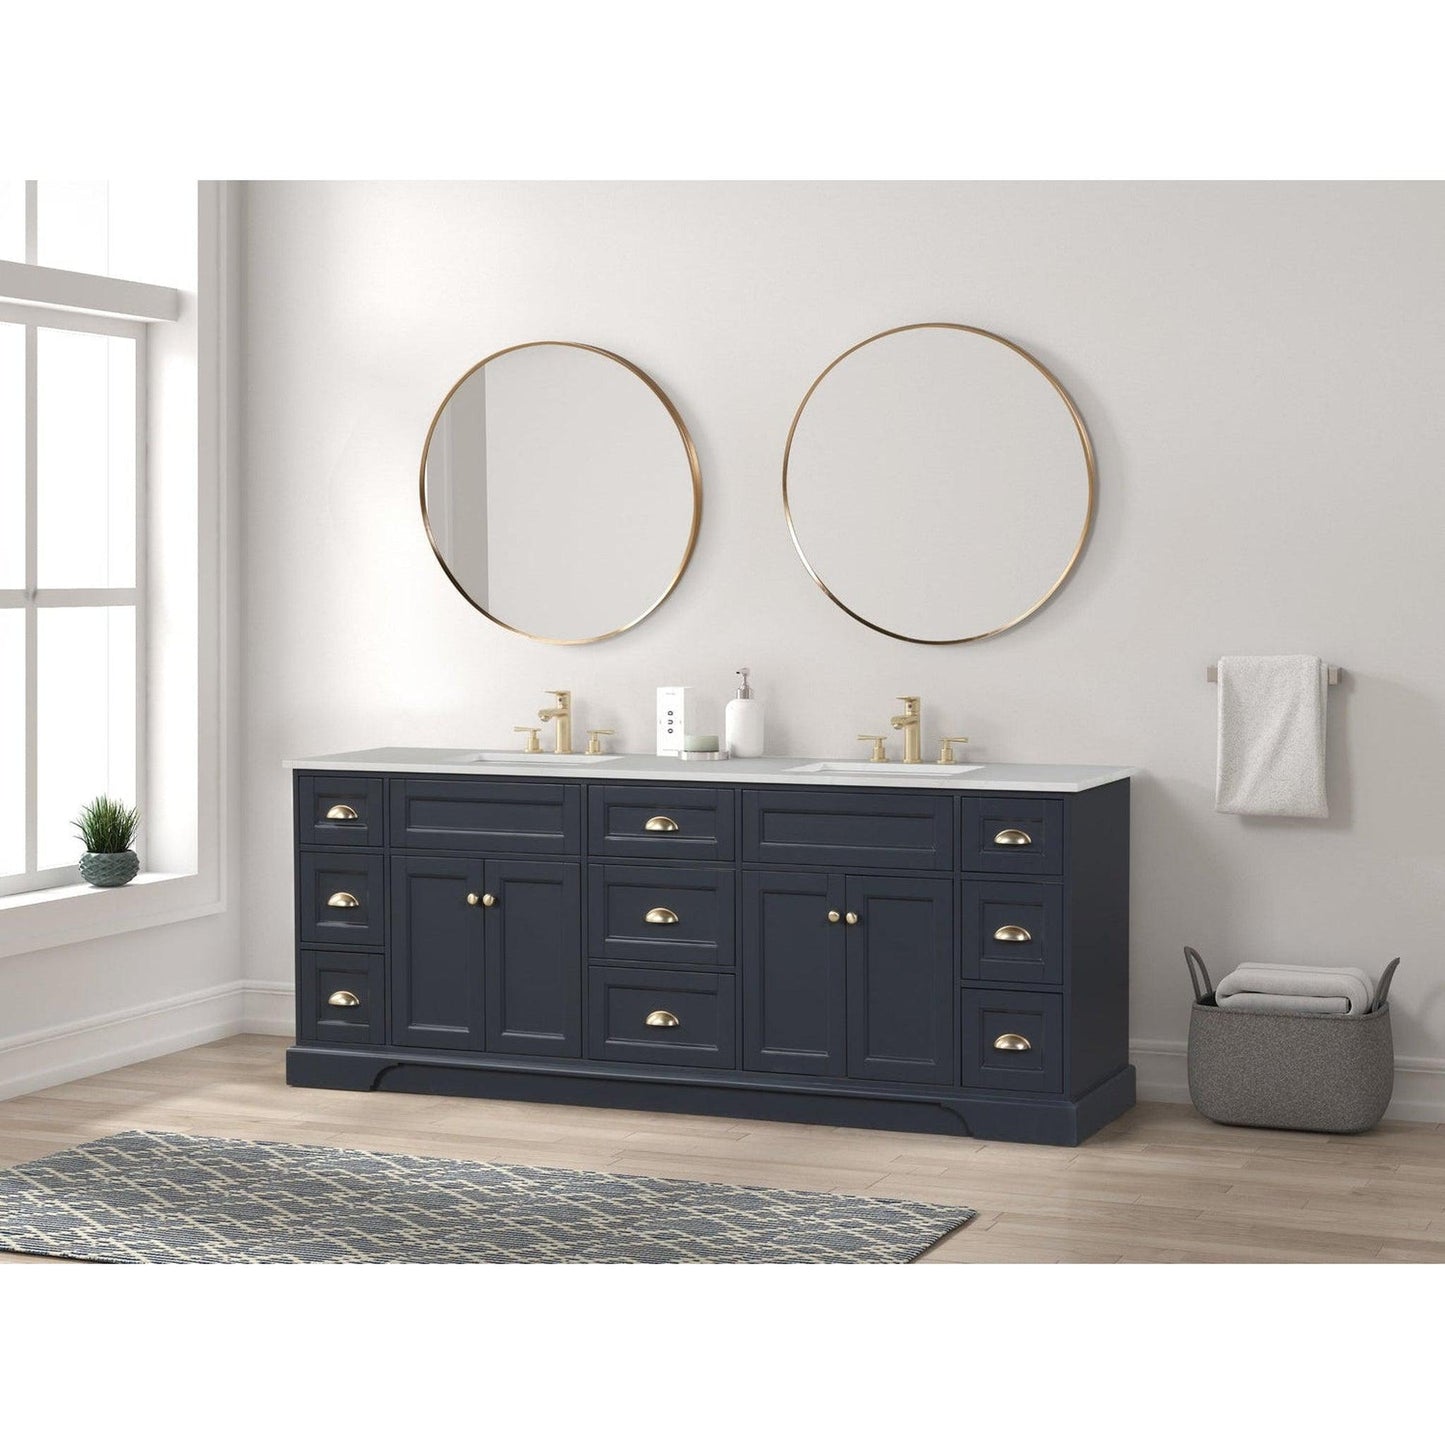 Eviva Epic 84" x 34" Charcoal Gray Freestanding Bathroom Vanity With Brushed Gold Hardware and Quartz Countertop With Double Undermount Sink